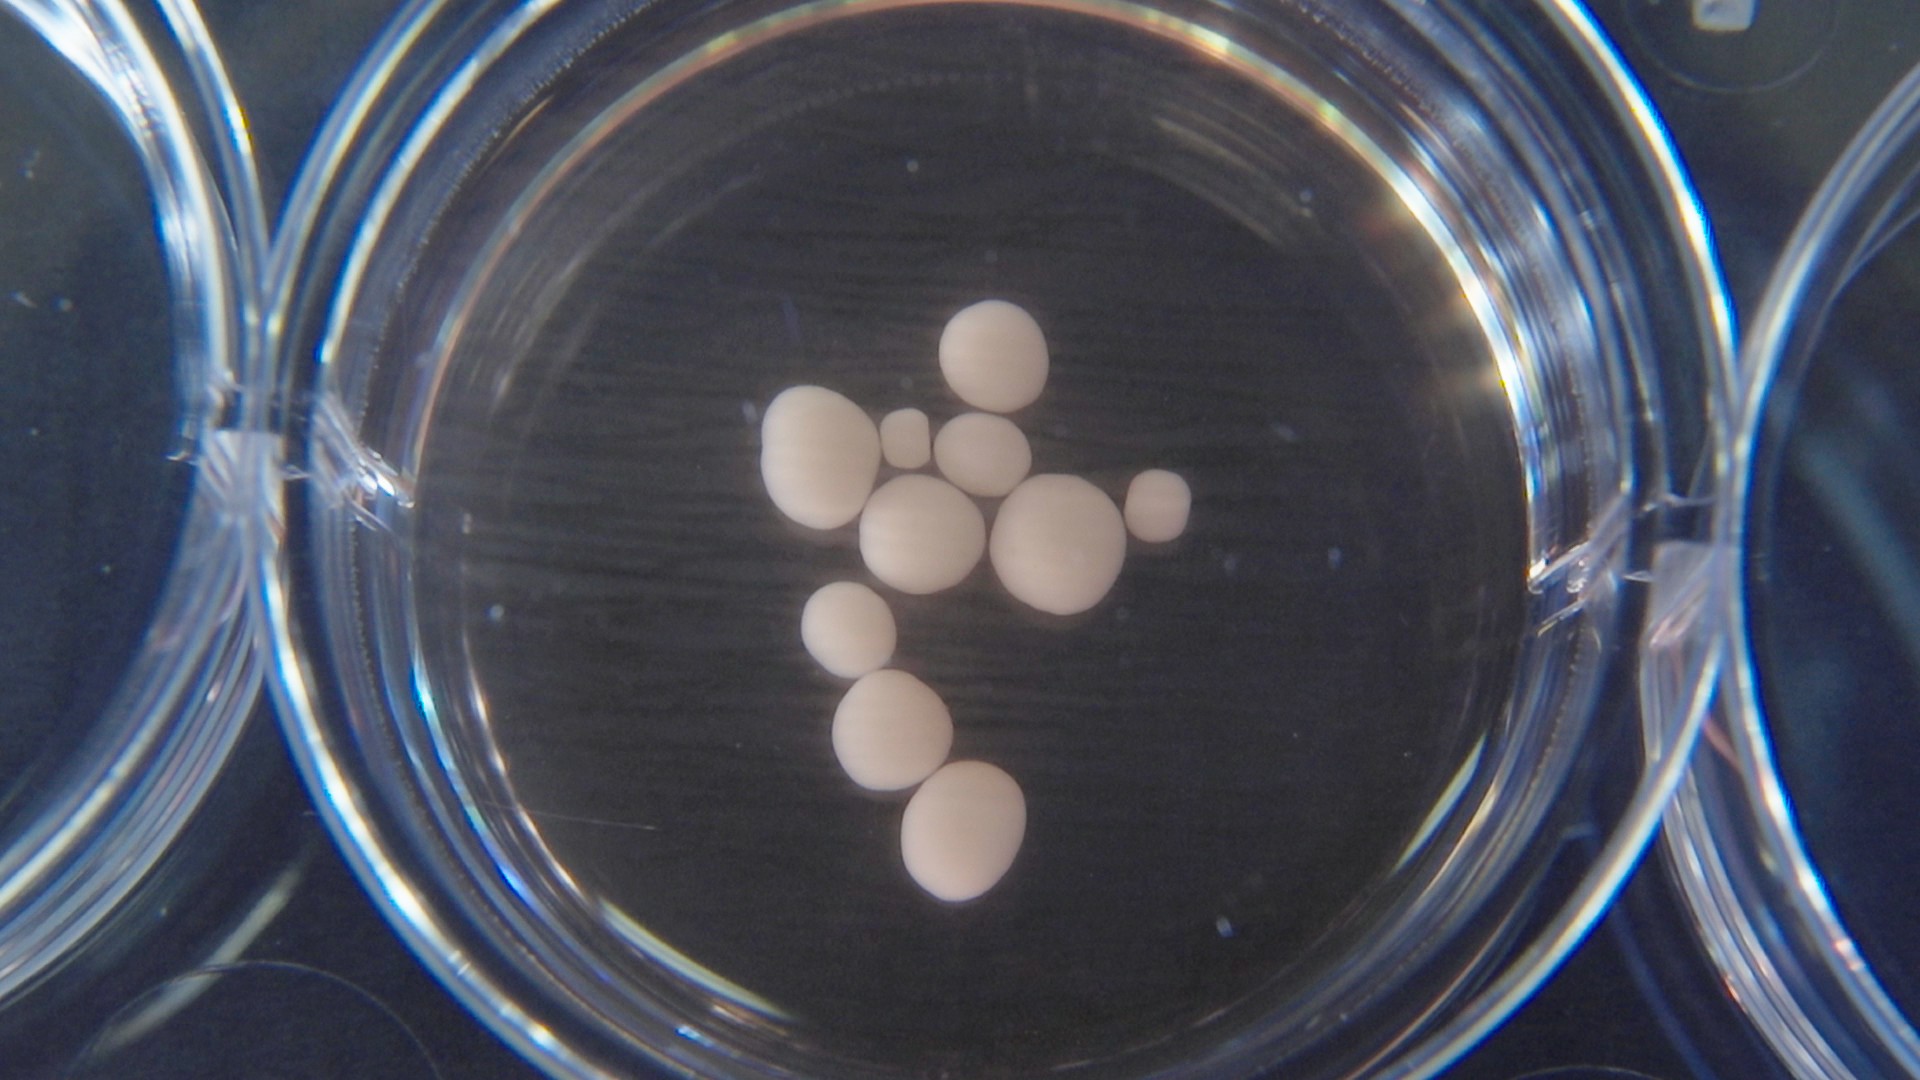 Image of brain organoids in a petri dish. The organoids are spherical and a cream color. There are 10 of them and they are all different sizes.